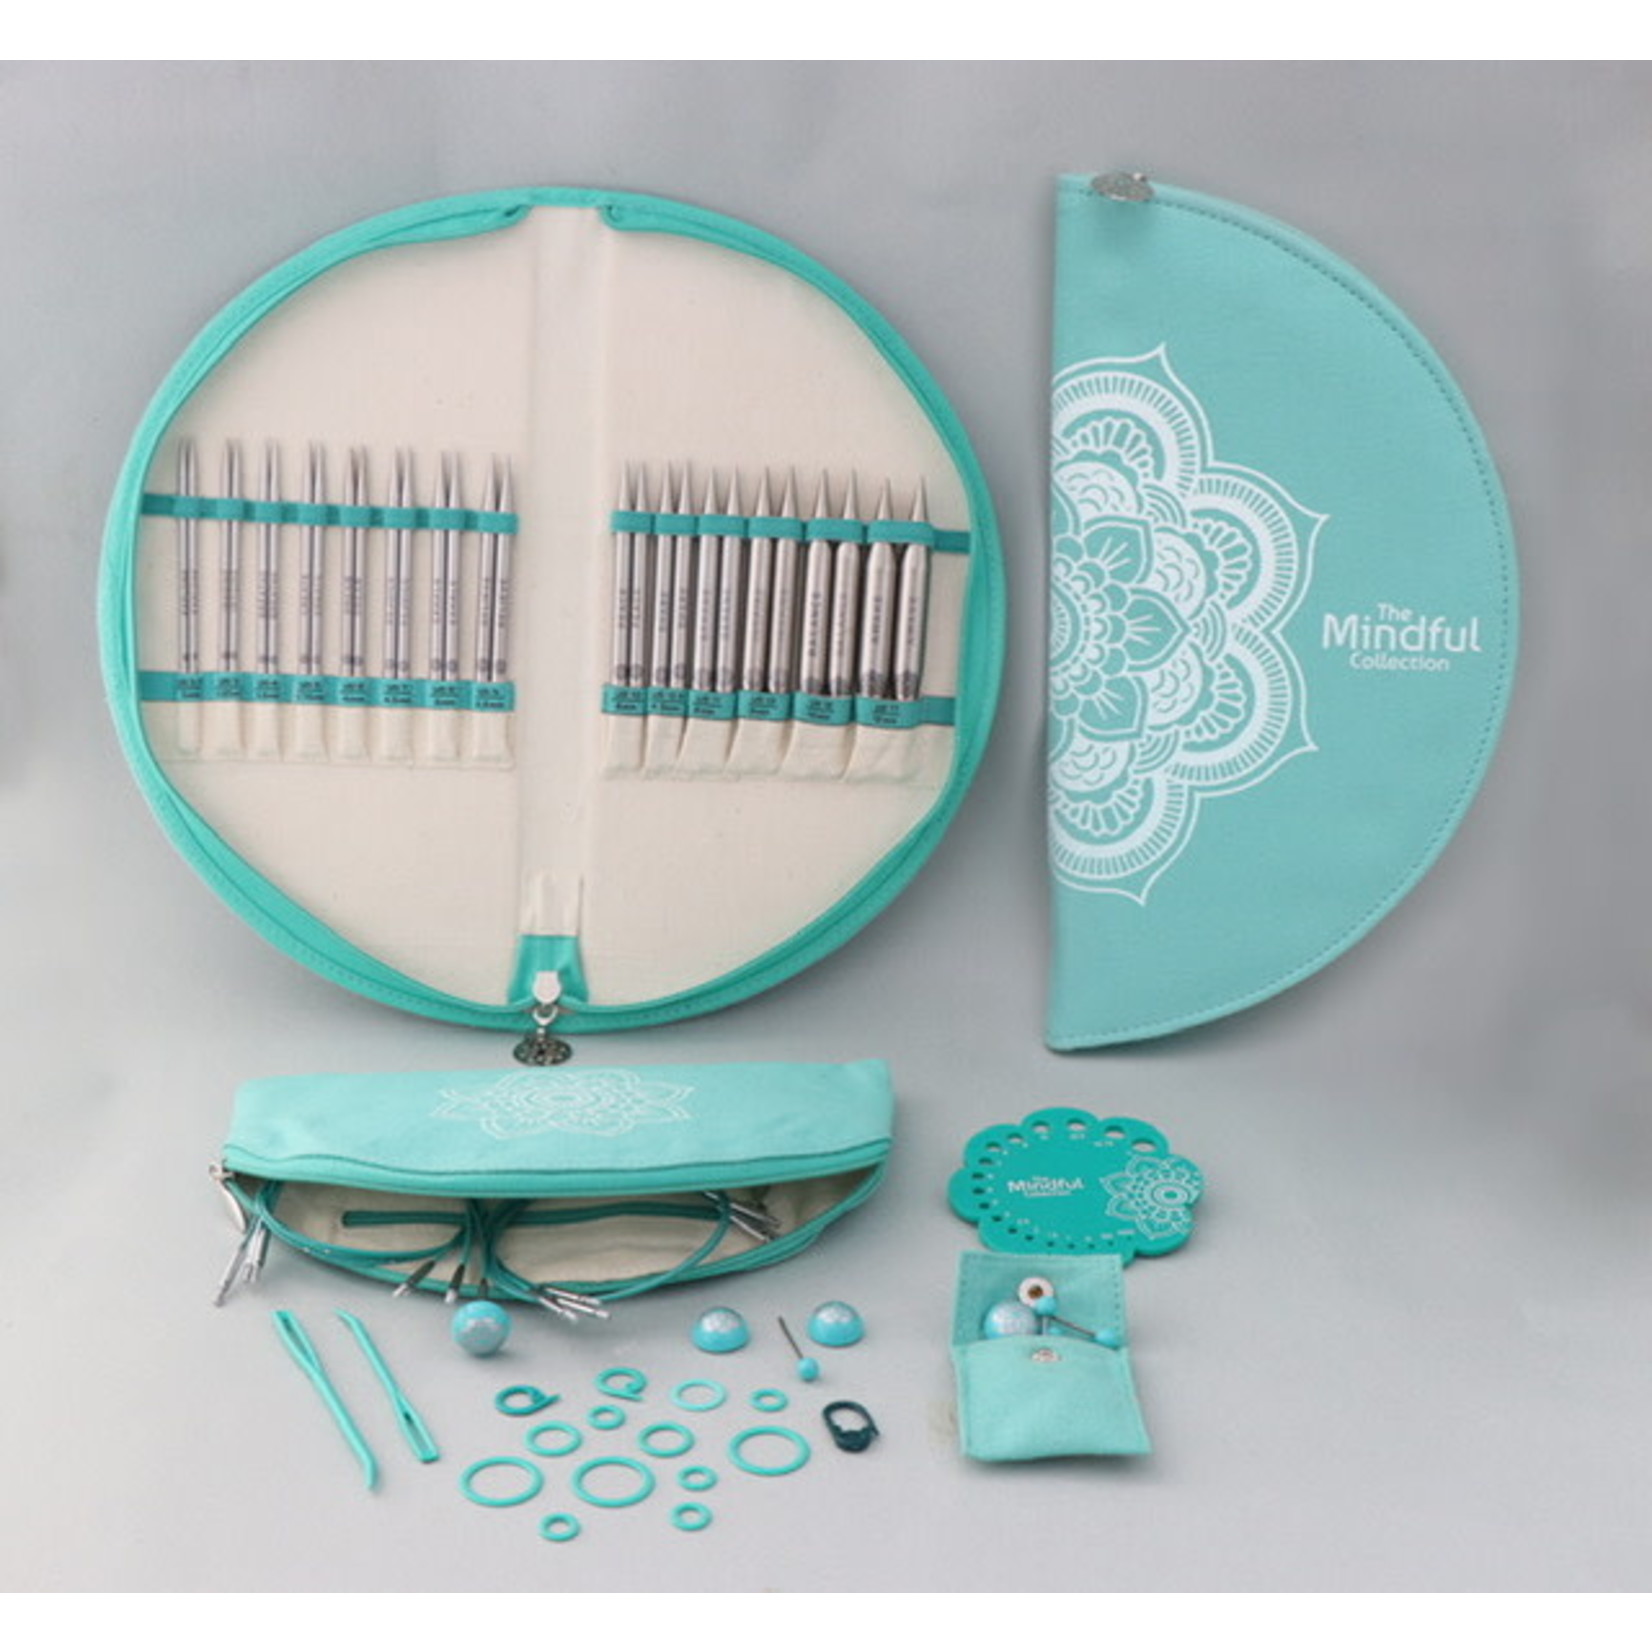 Knitter's Pride The Mindful Collection Interchangeable Circular Needle Set The Gratitude Set